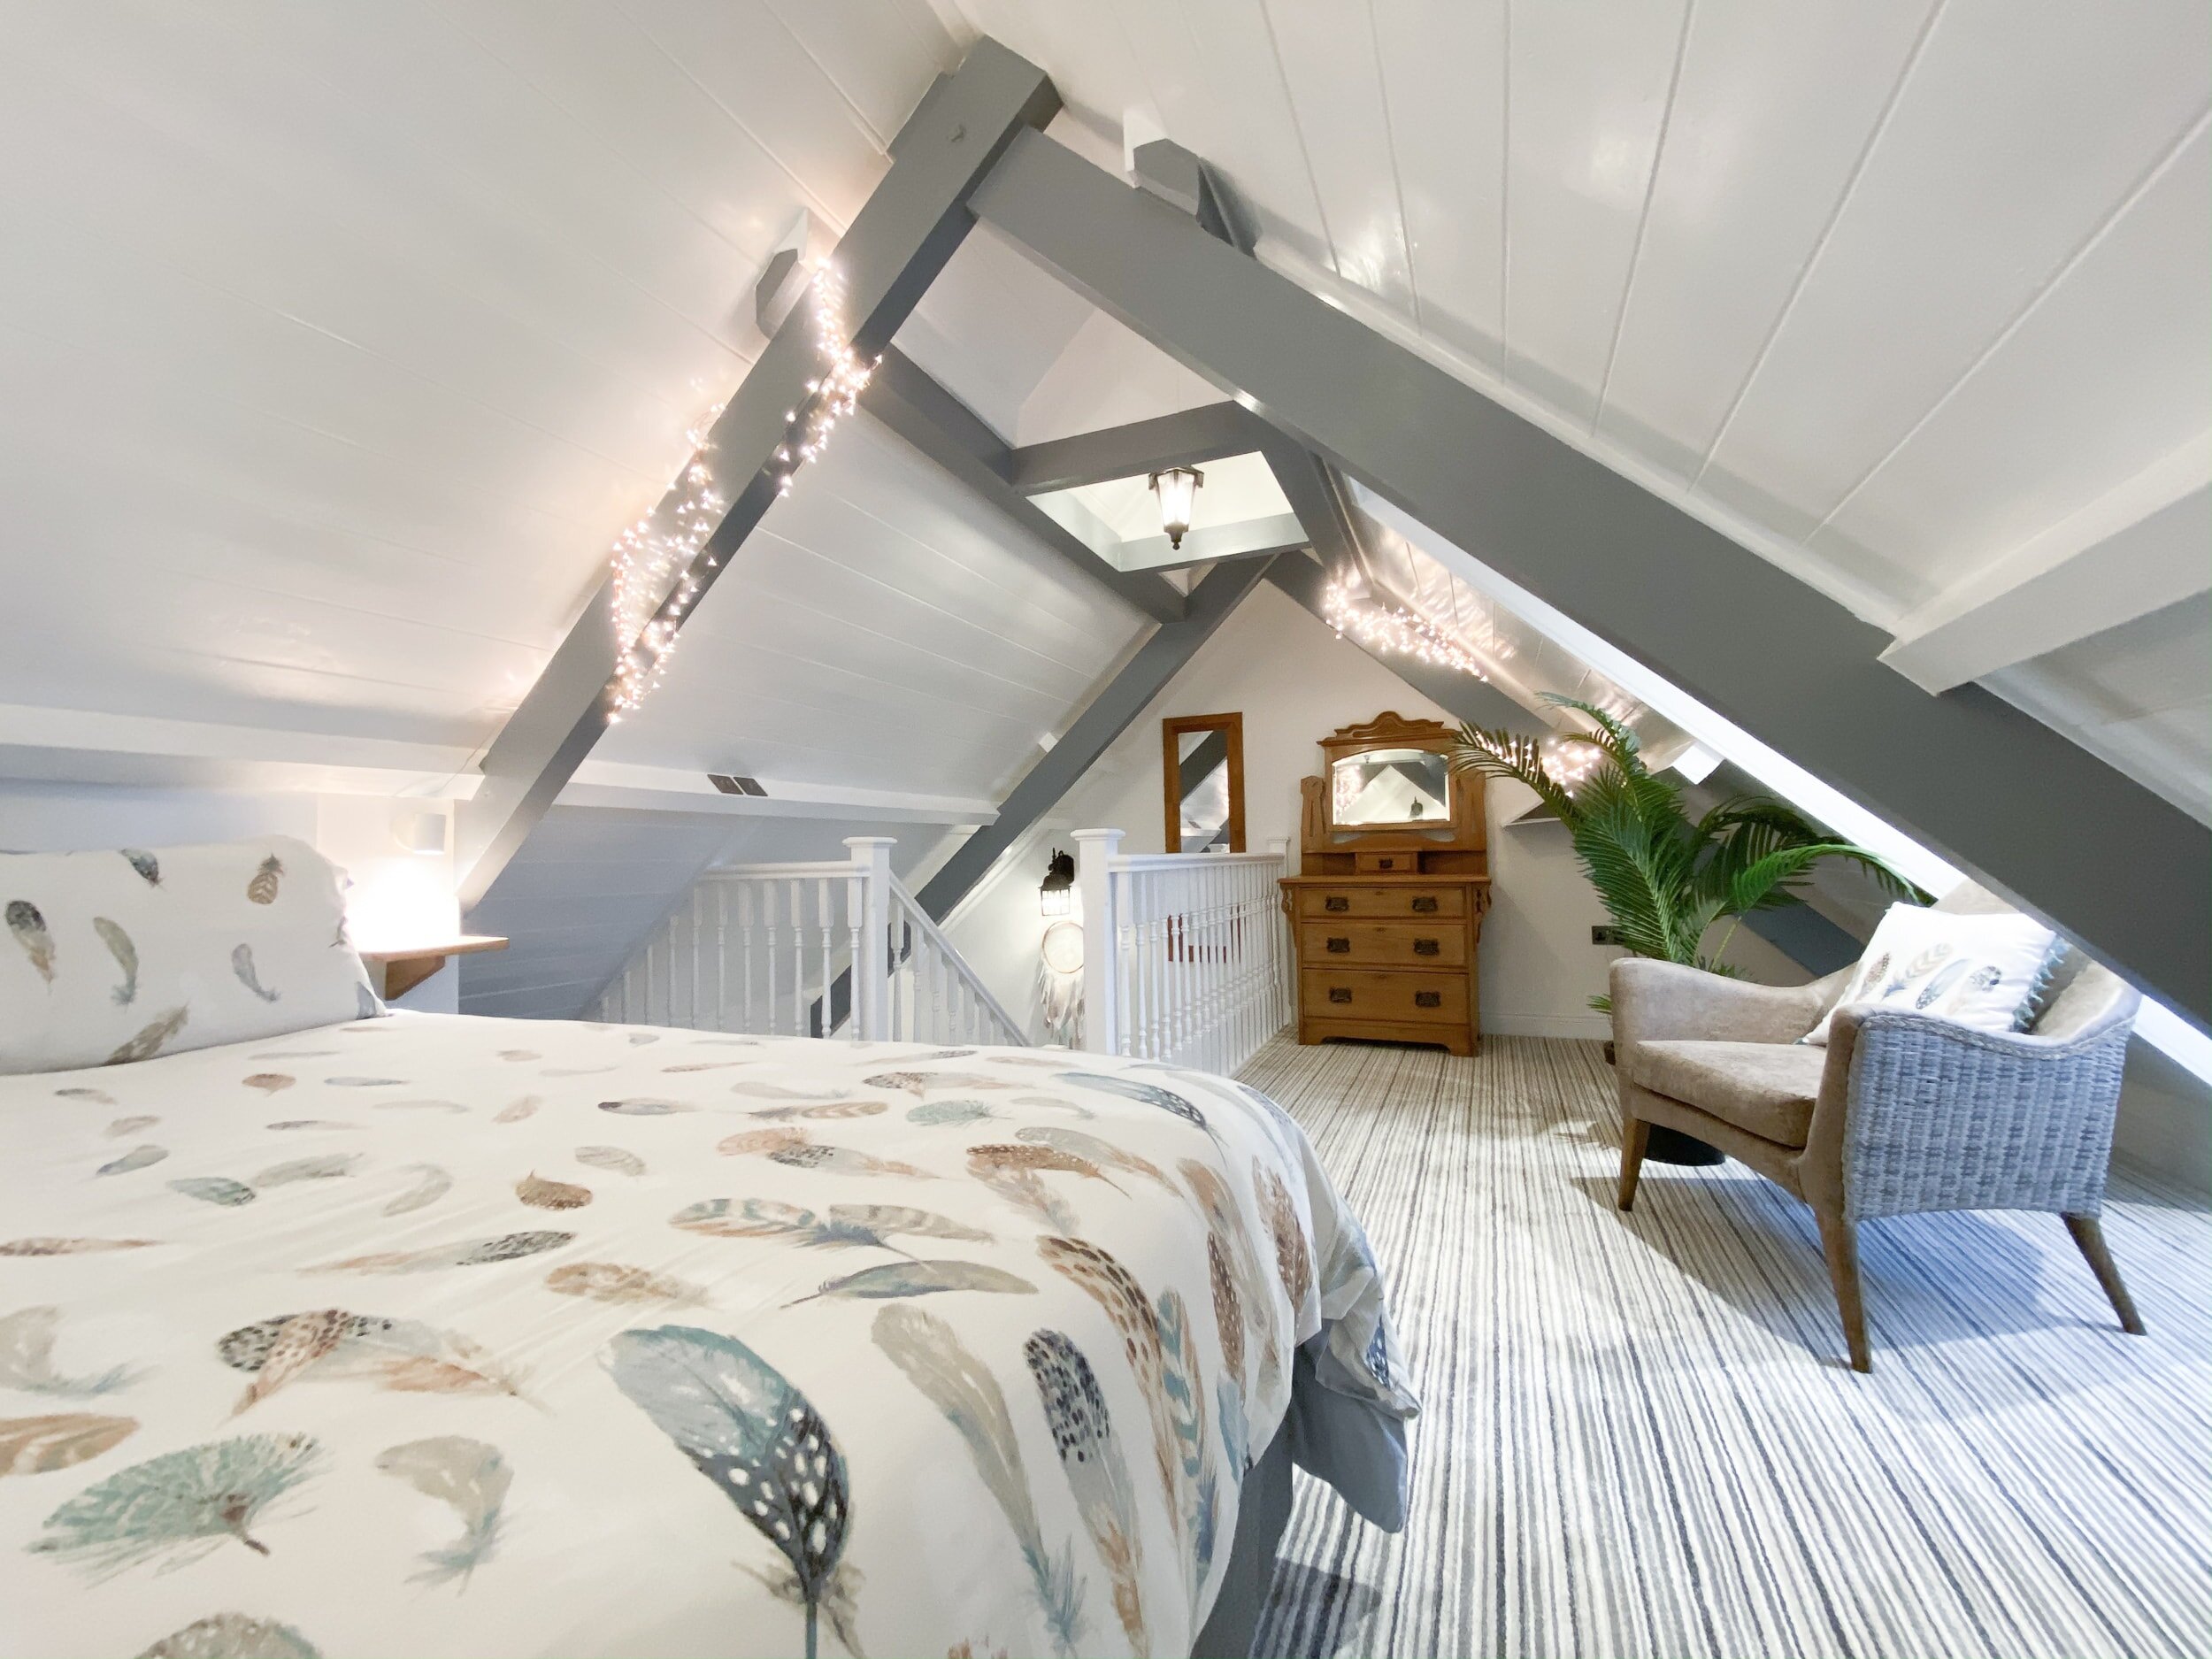 Dreamcatcher bedroom with fairy lights and sloped ceilings